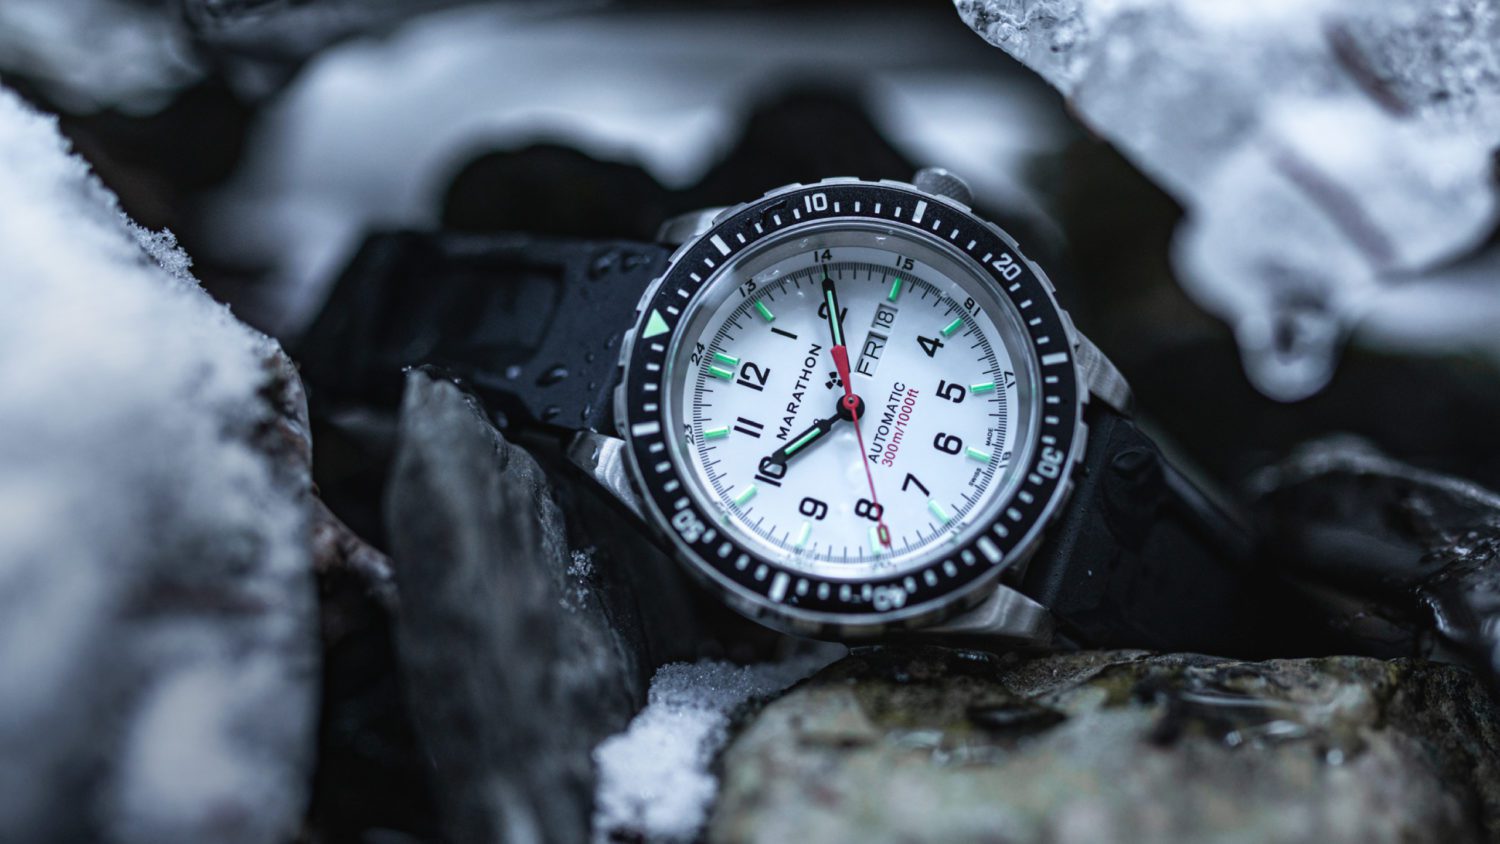 Designed for professional Search & Rescue use specifically in bright and hazardous environments.
Model: 46mm Arctic Edition Jumbo Day/Date Automatic (JDD)